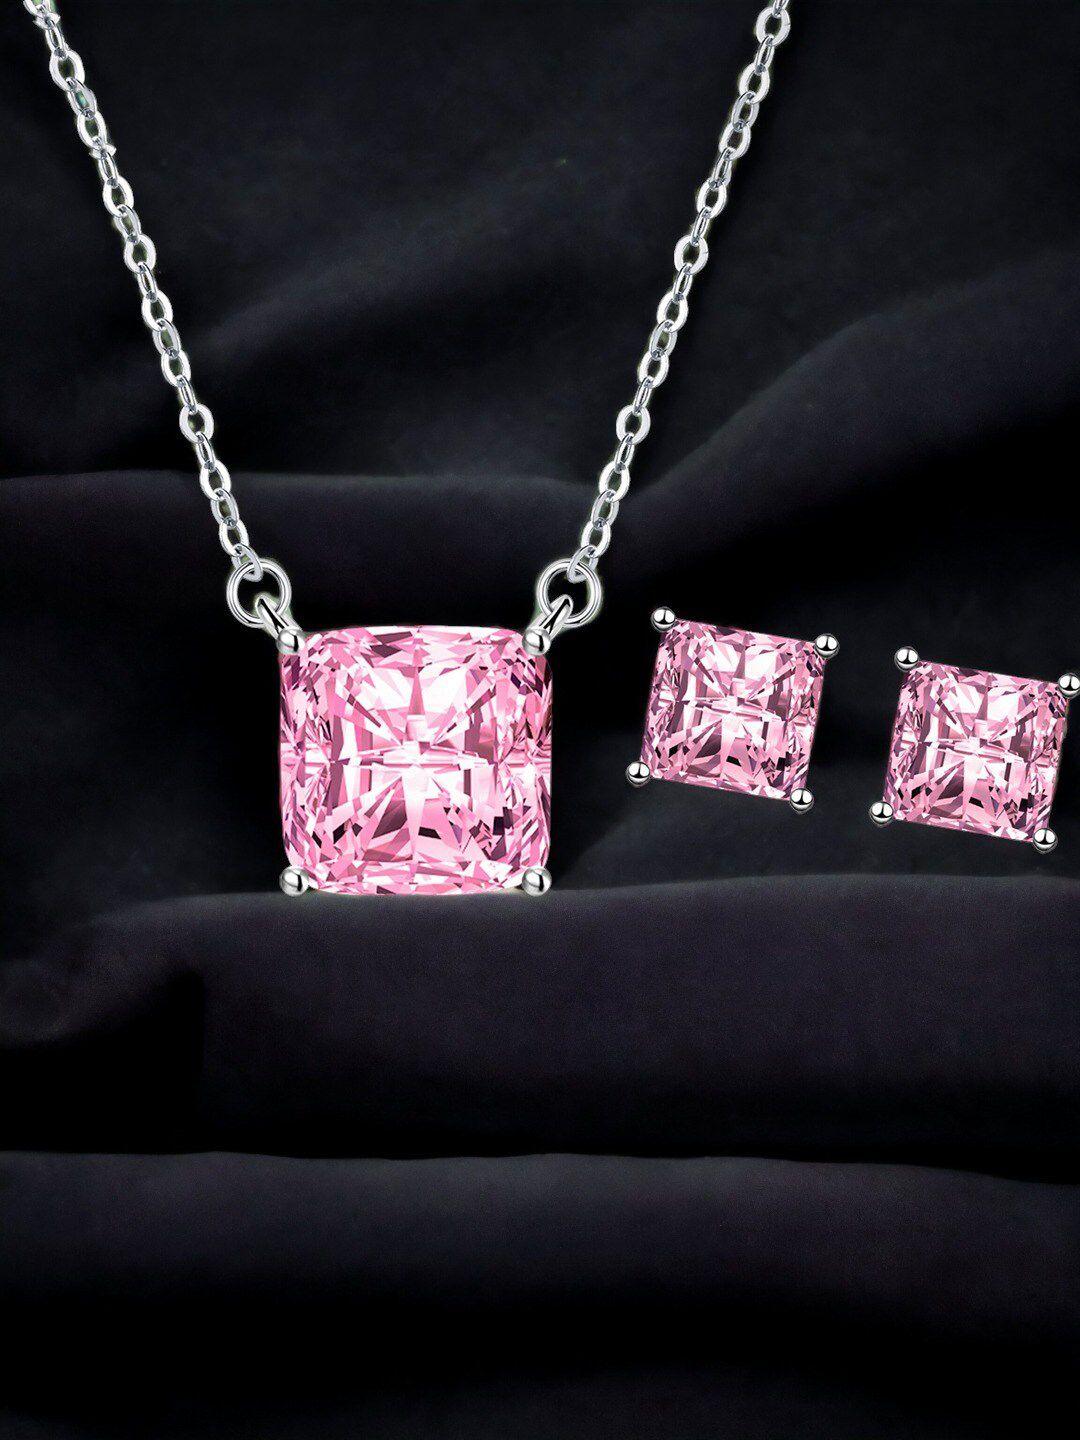 designs & you silver-plated cubic zirconia-studded necklace and earrings